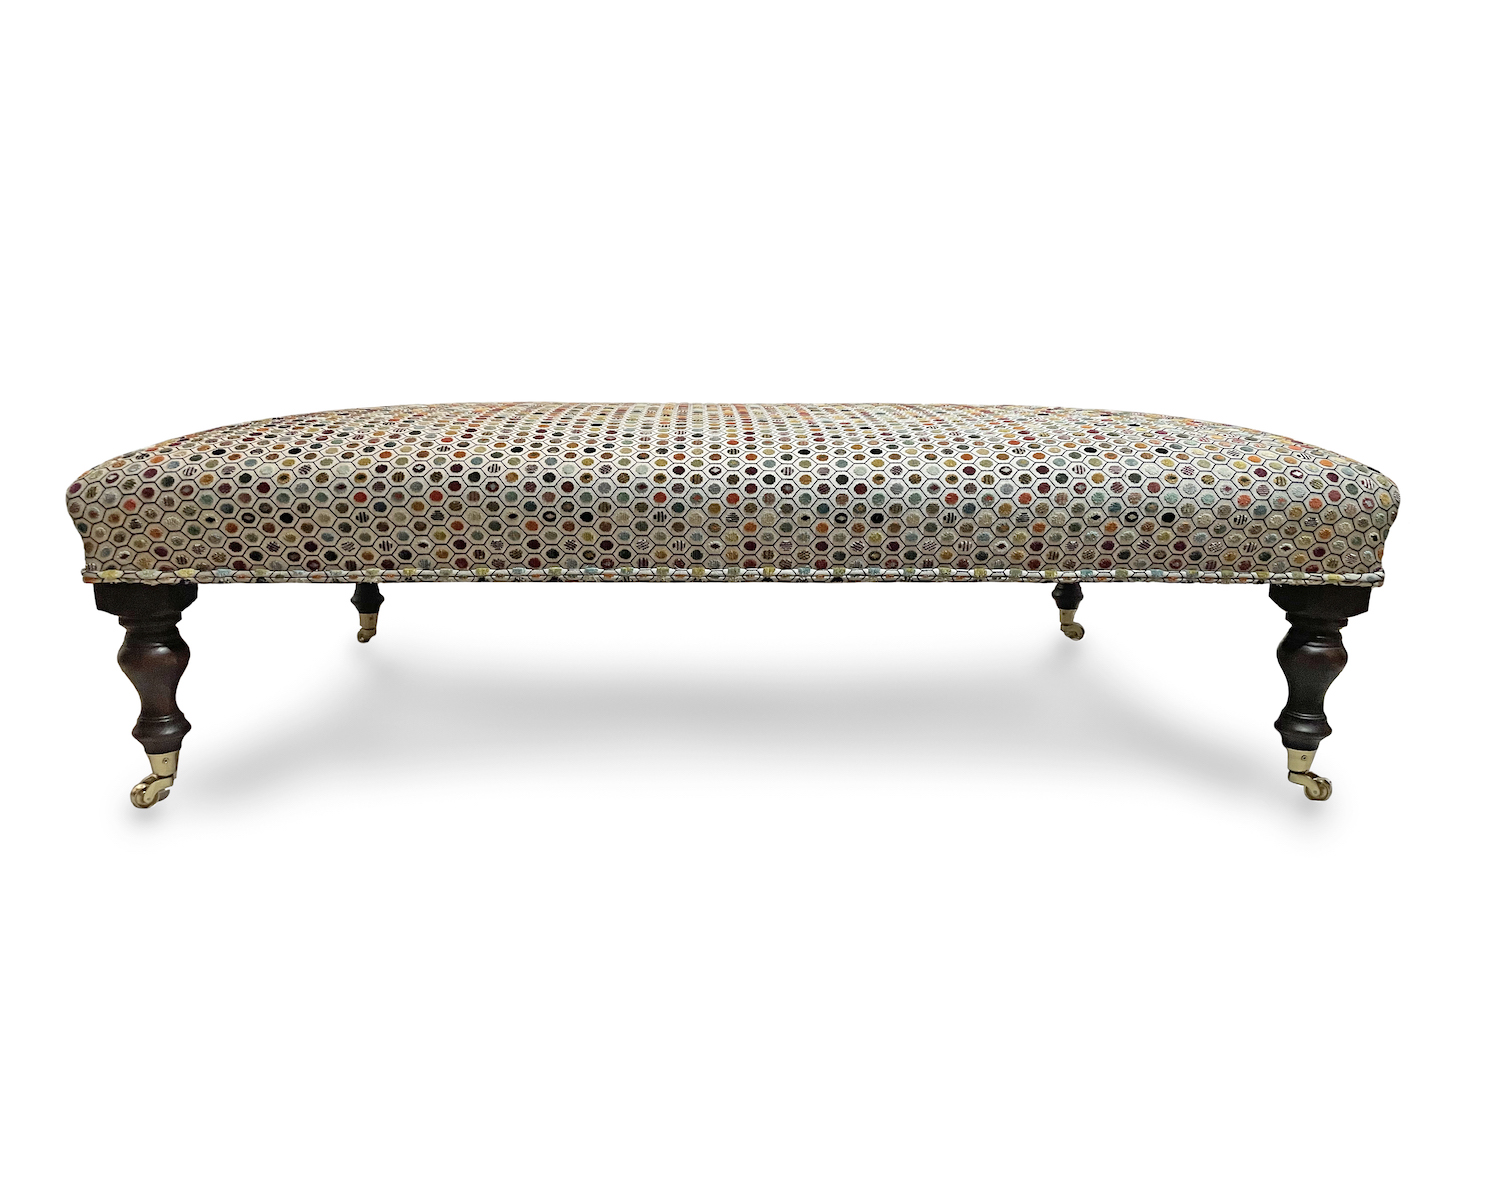 Slender Border Footstool with Self Piping, Turned Legs and Solid Brass Castors